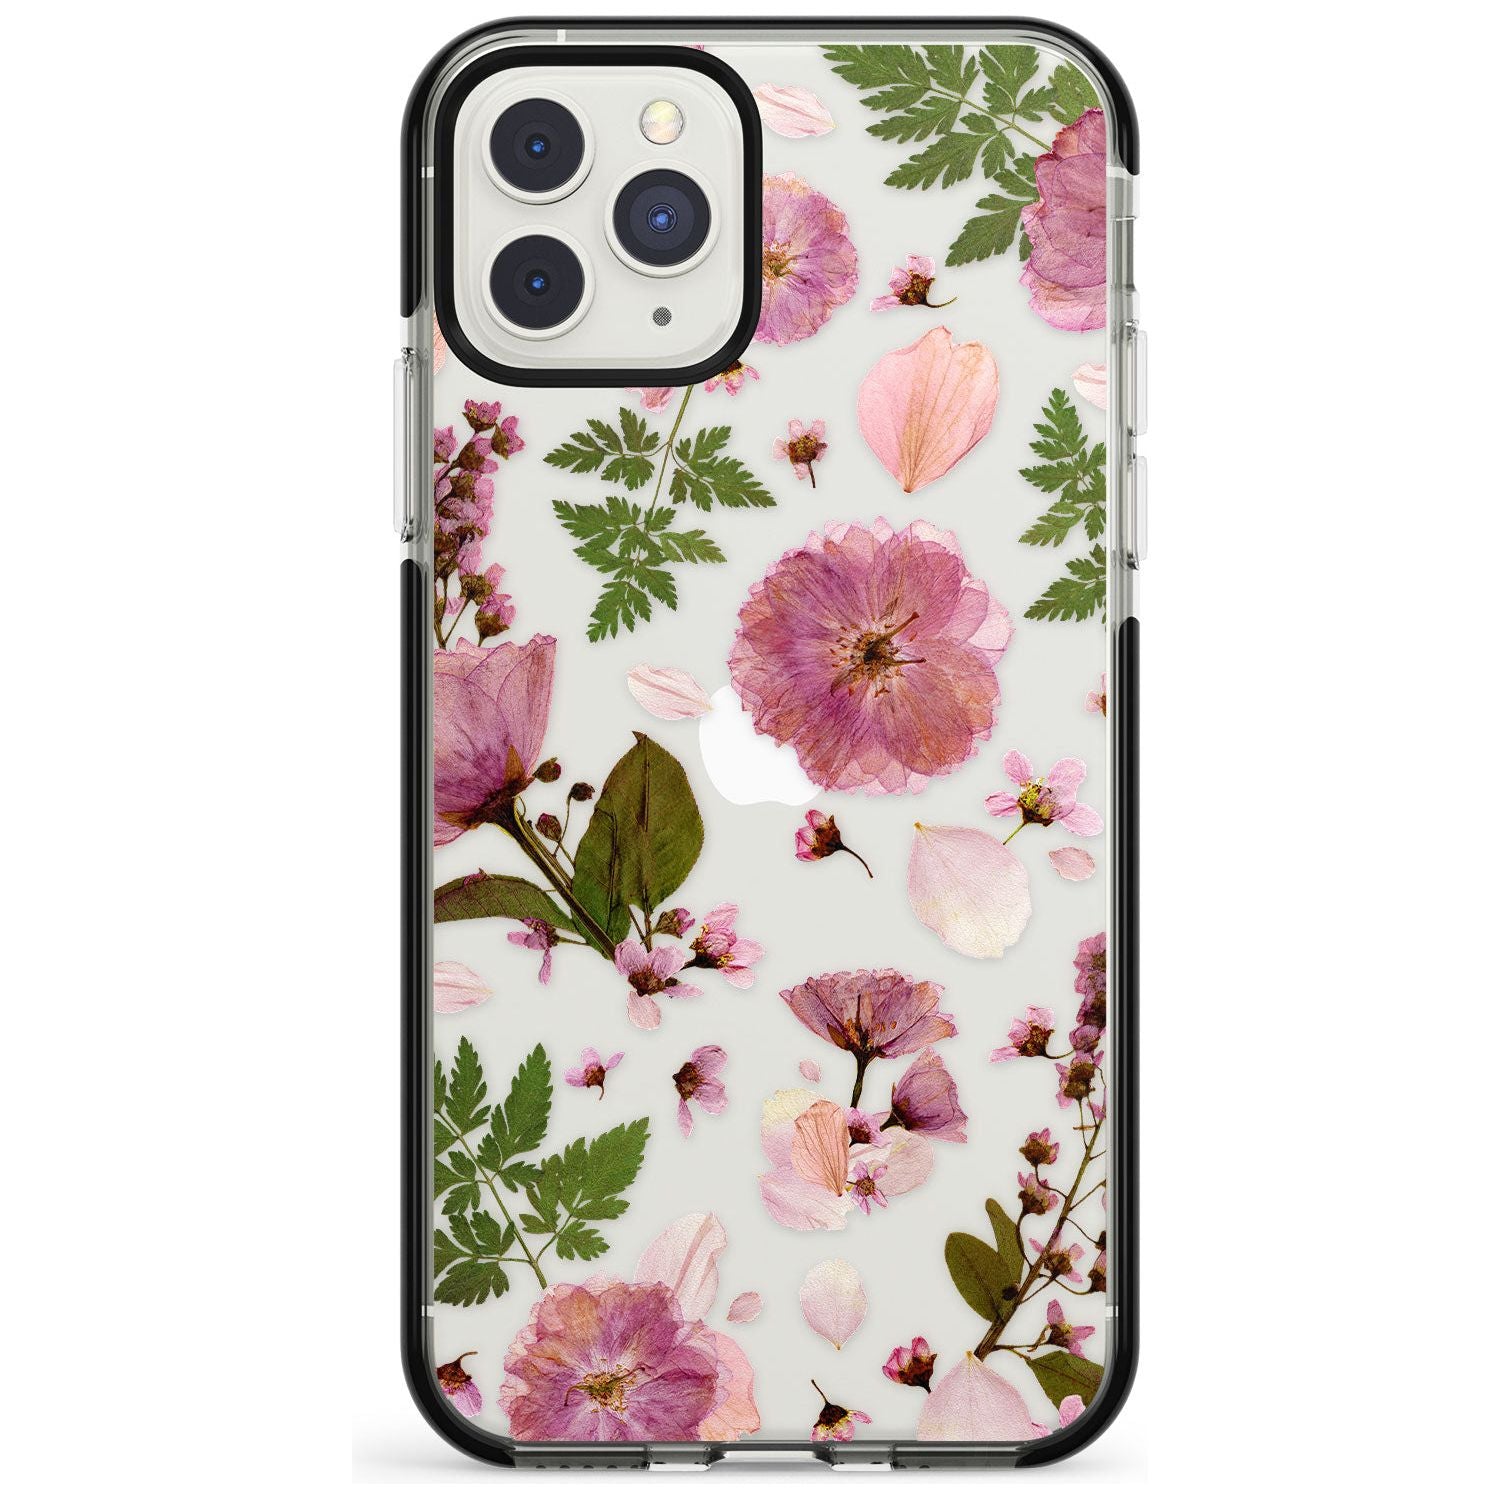 Natural Arrangement of Flowers & Leaves Design Black Impact Phone Case for iPhone 11 Pro Max